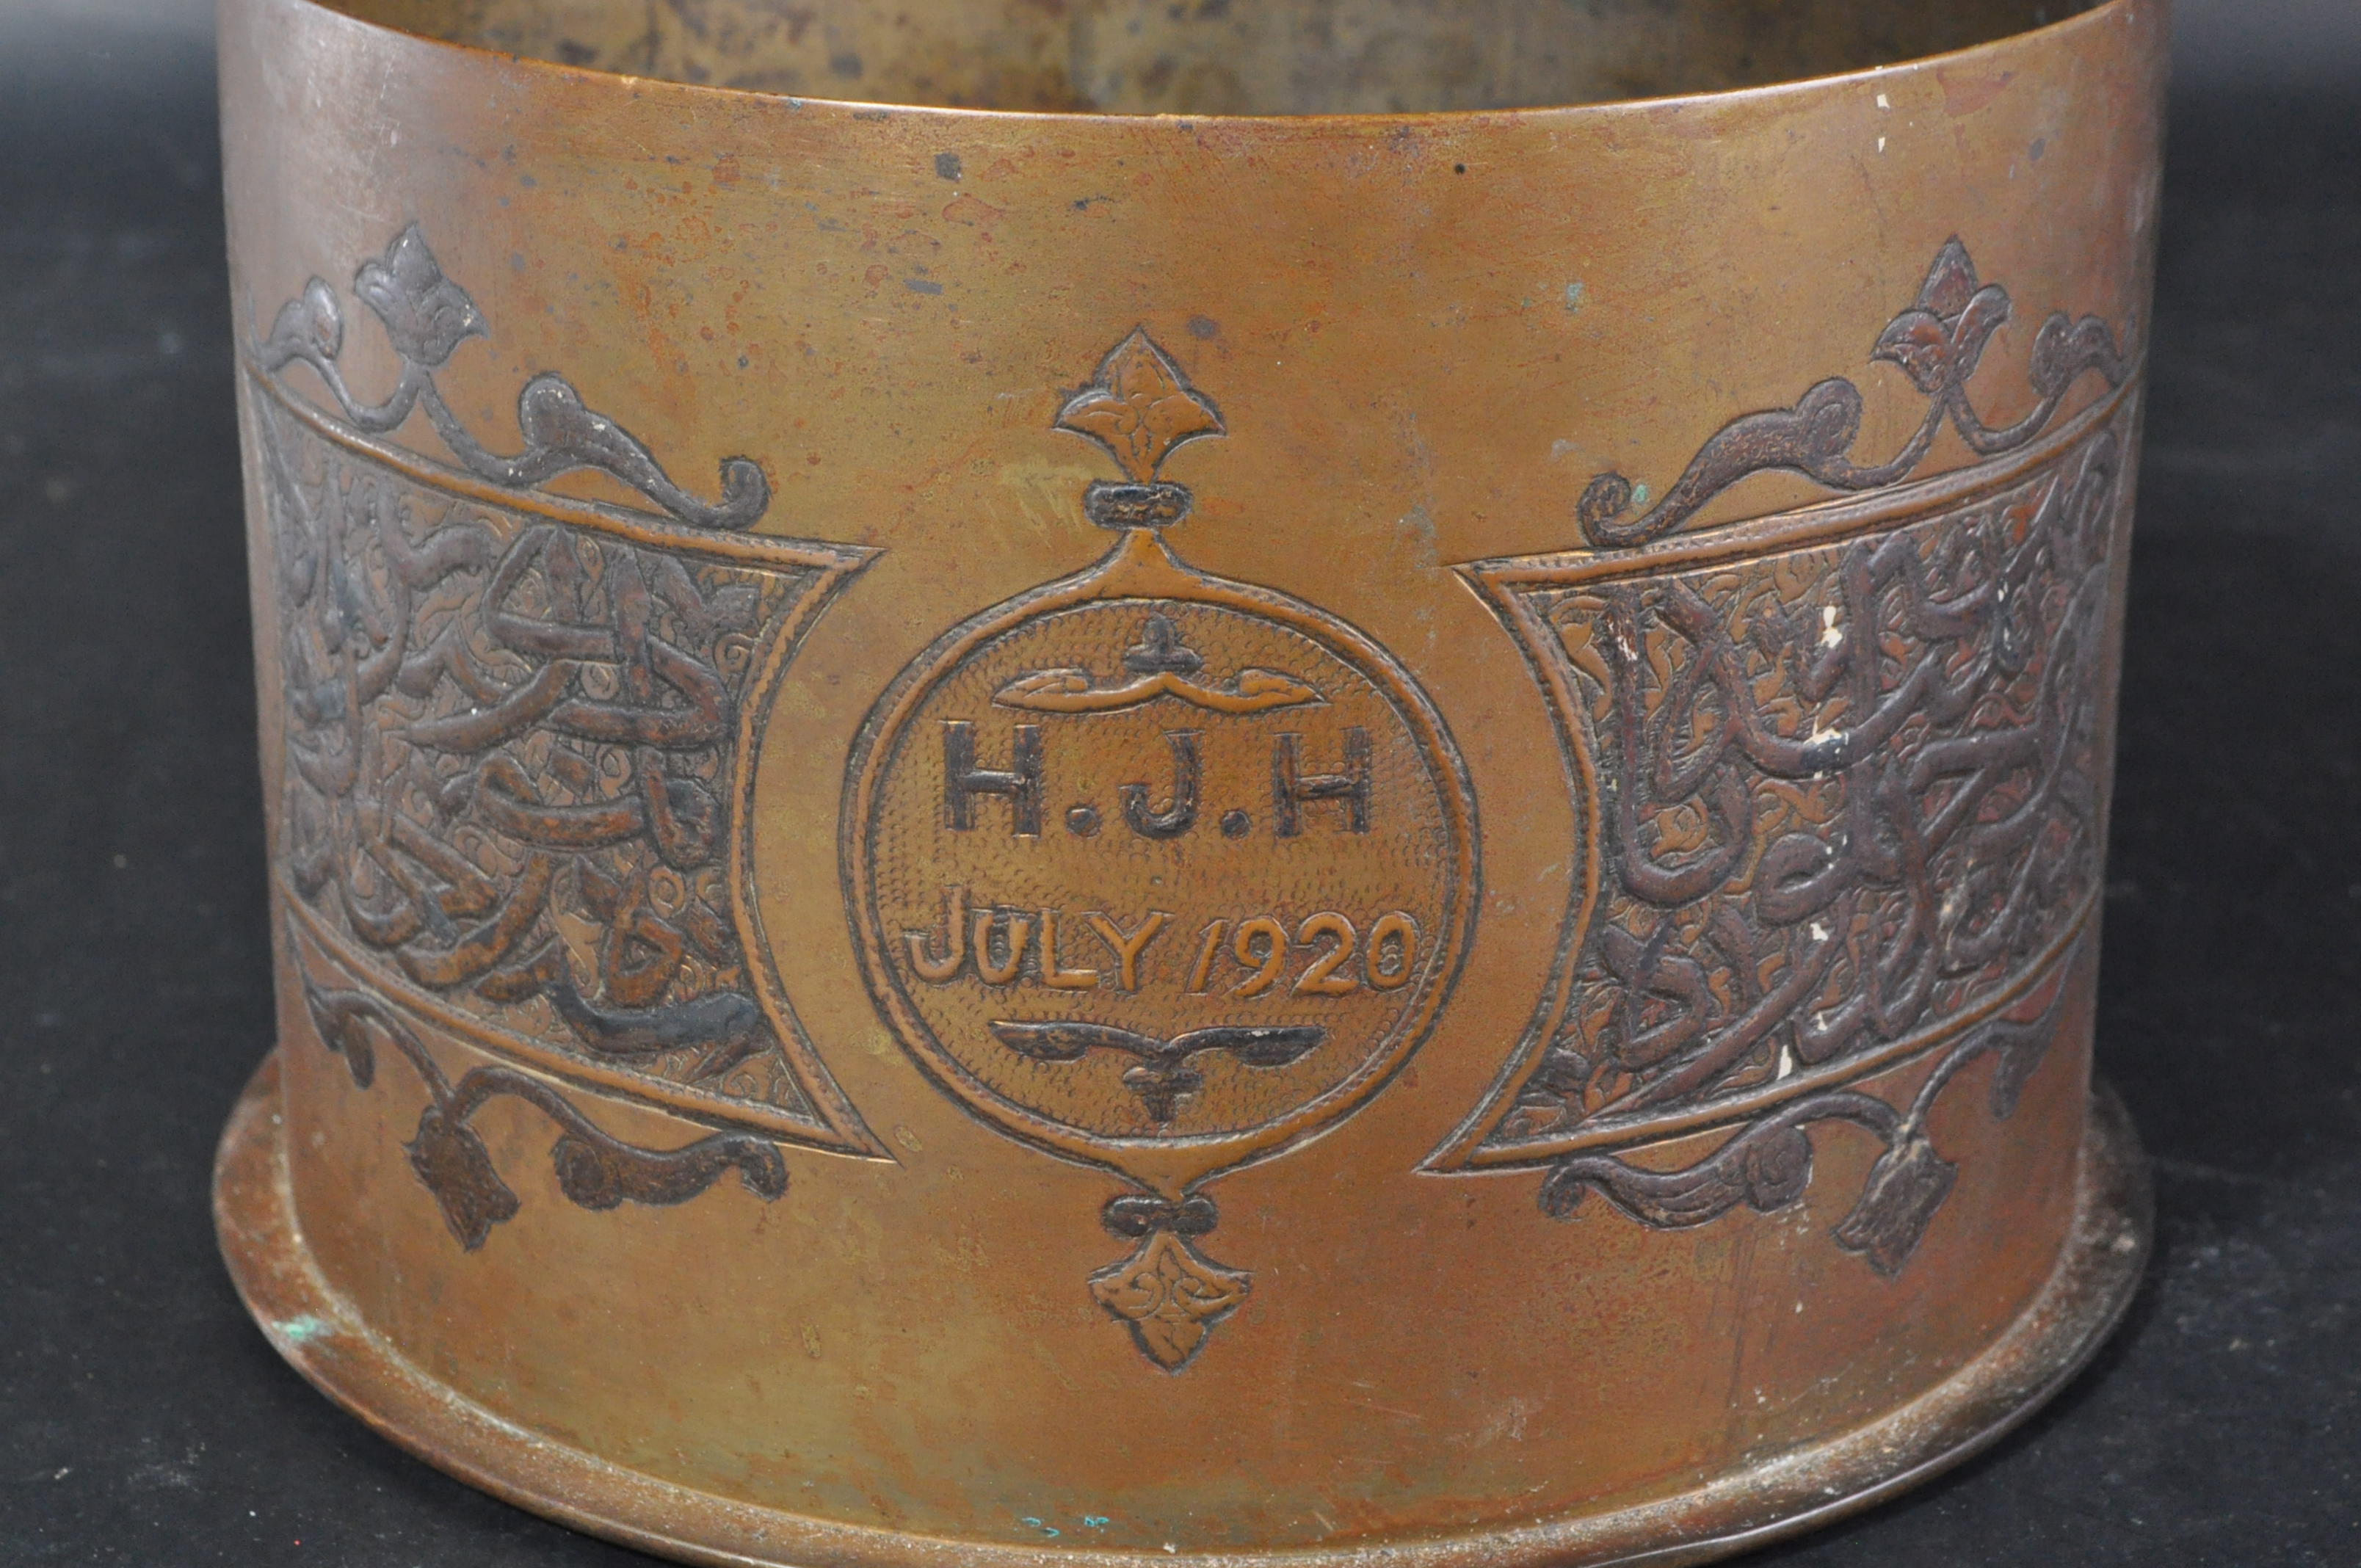 WWI FIRST WORLD WAR 1917 DATED ENGRAVED TRENCH ART ASHTRAY - Image 7 of 7